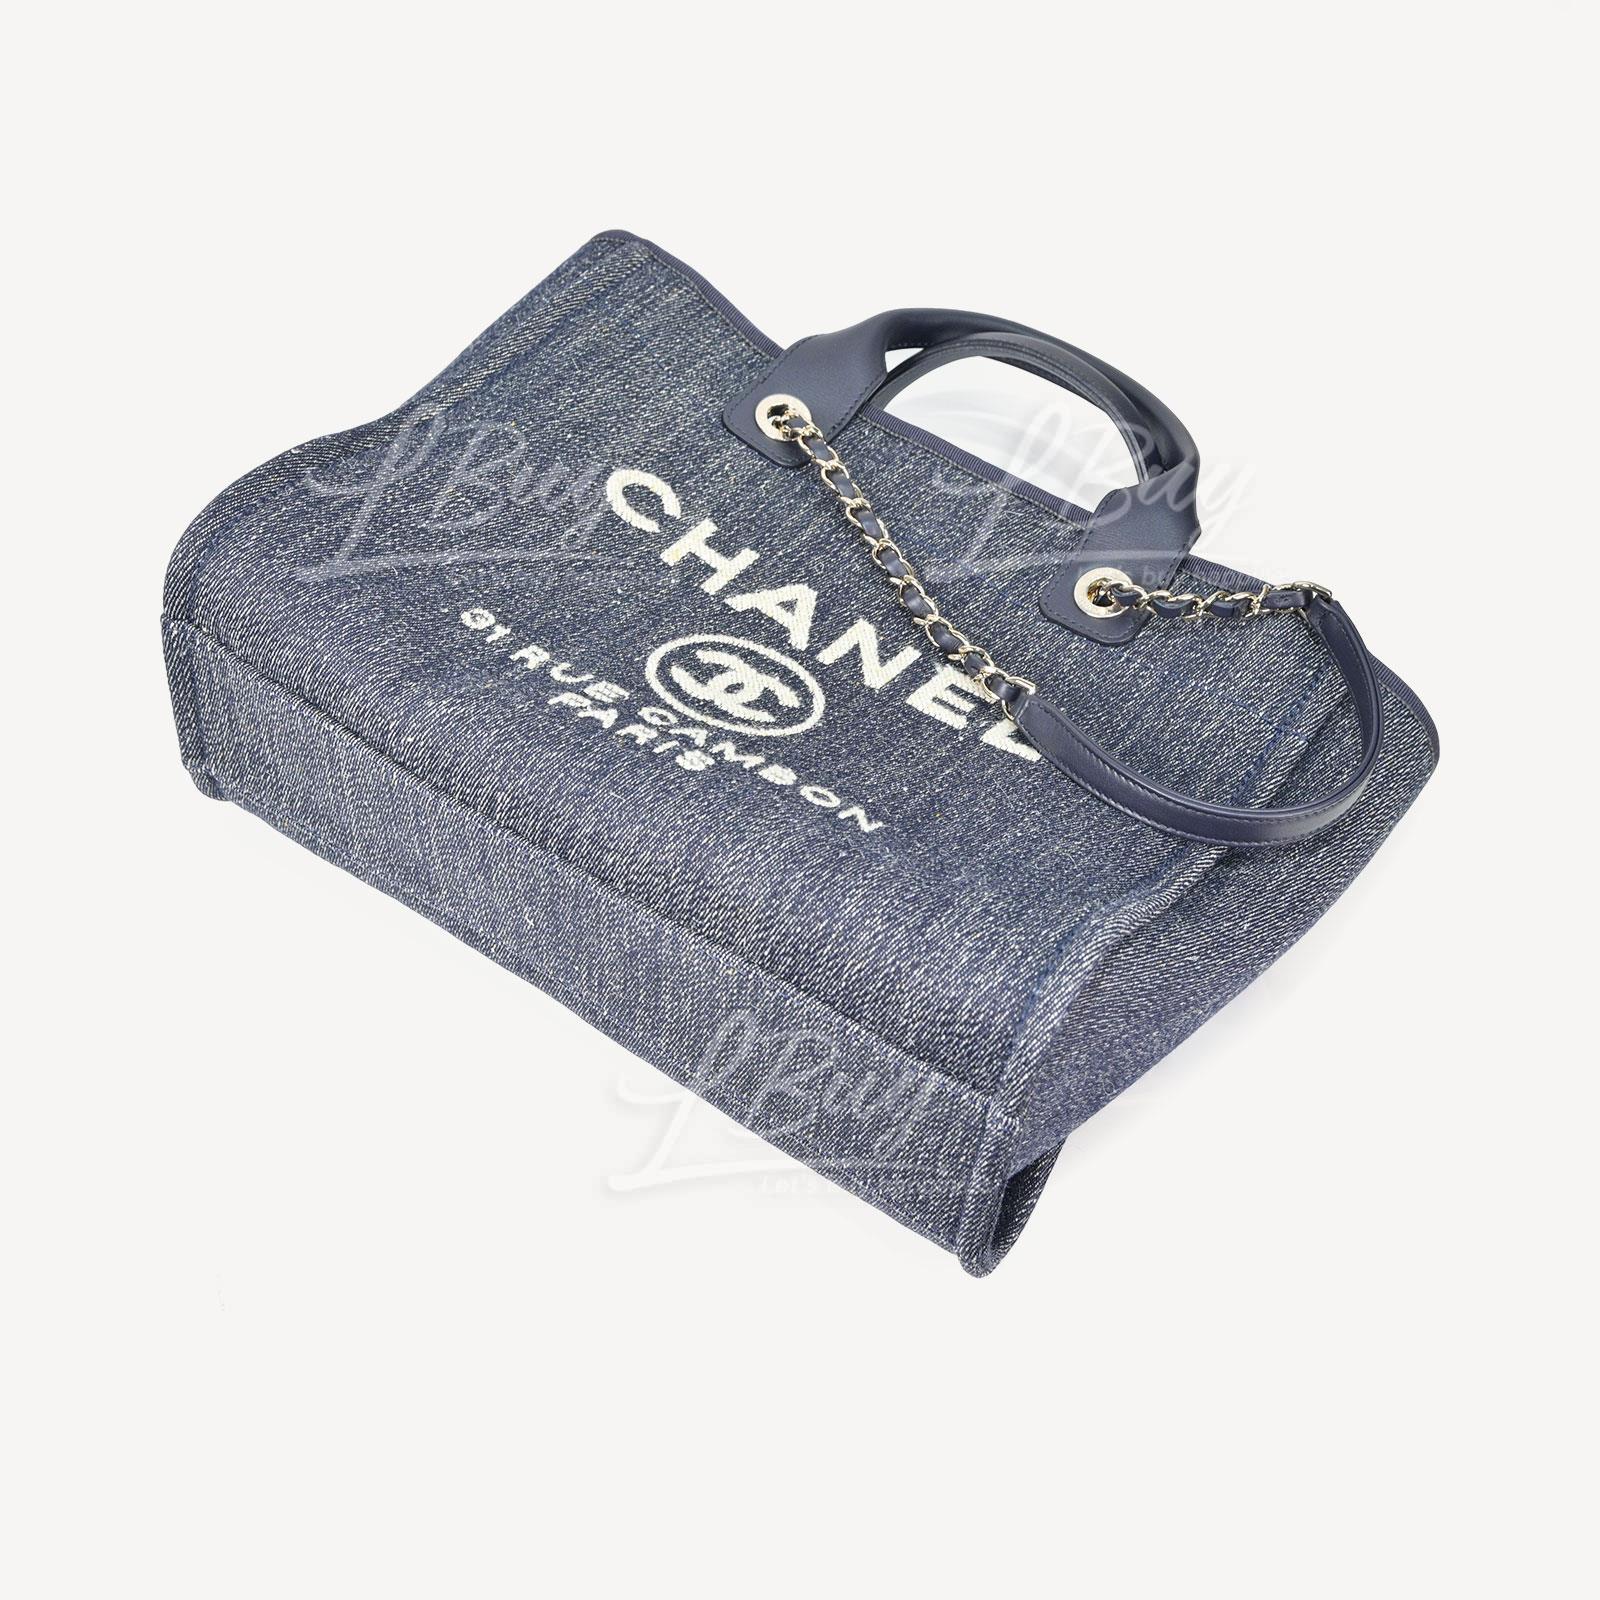 CHANEL Canvas Large Deauville Tote Blue 345866